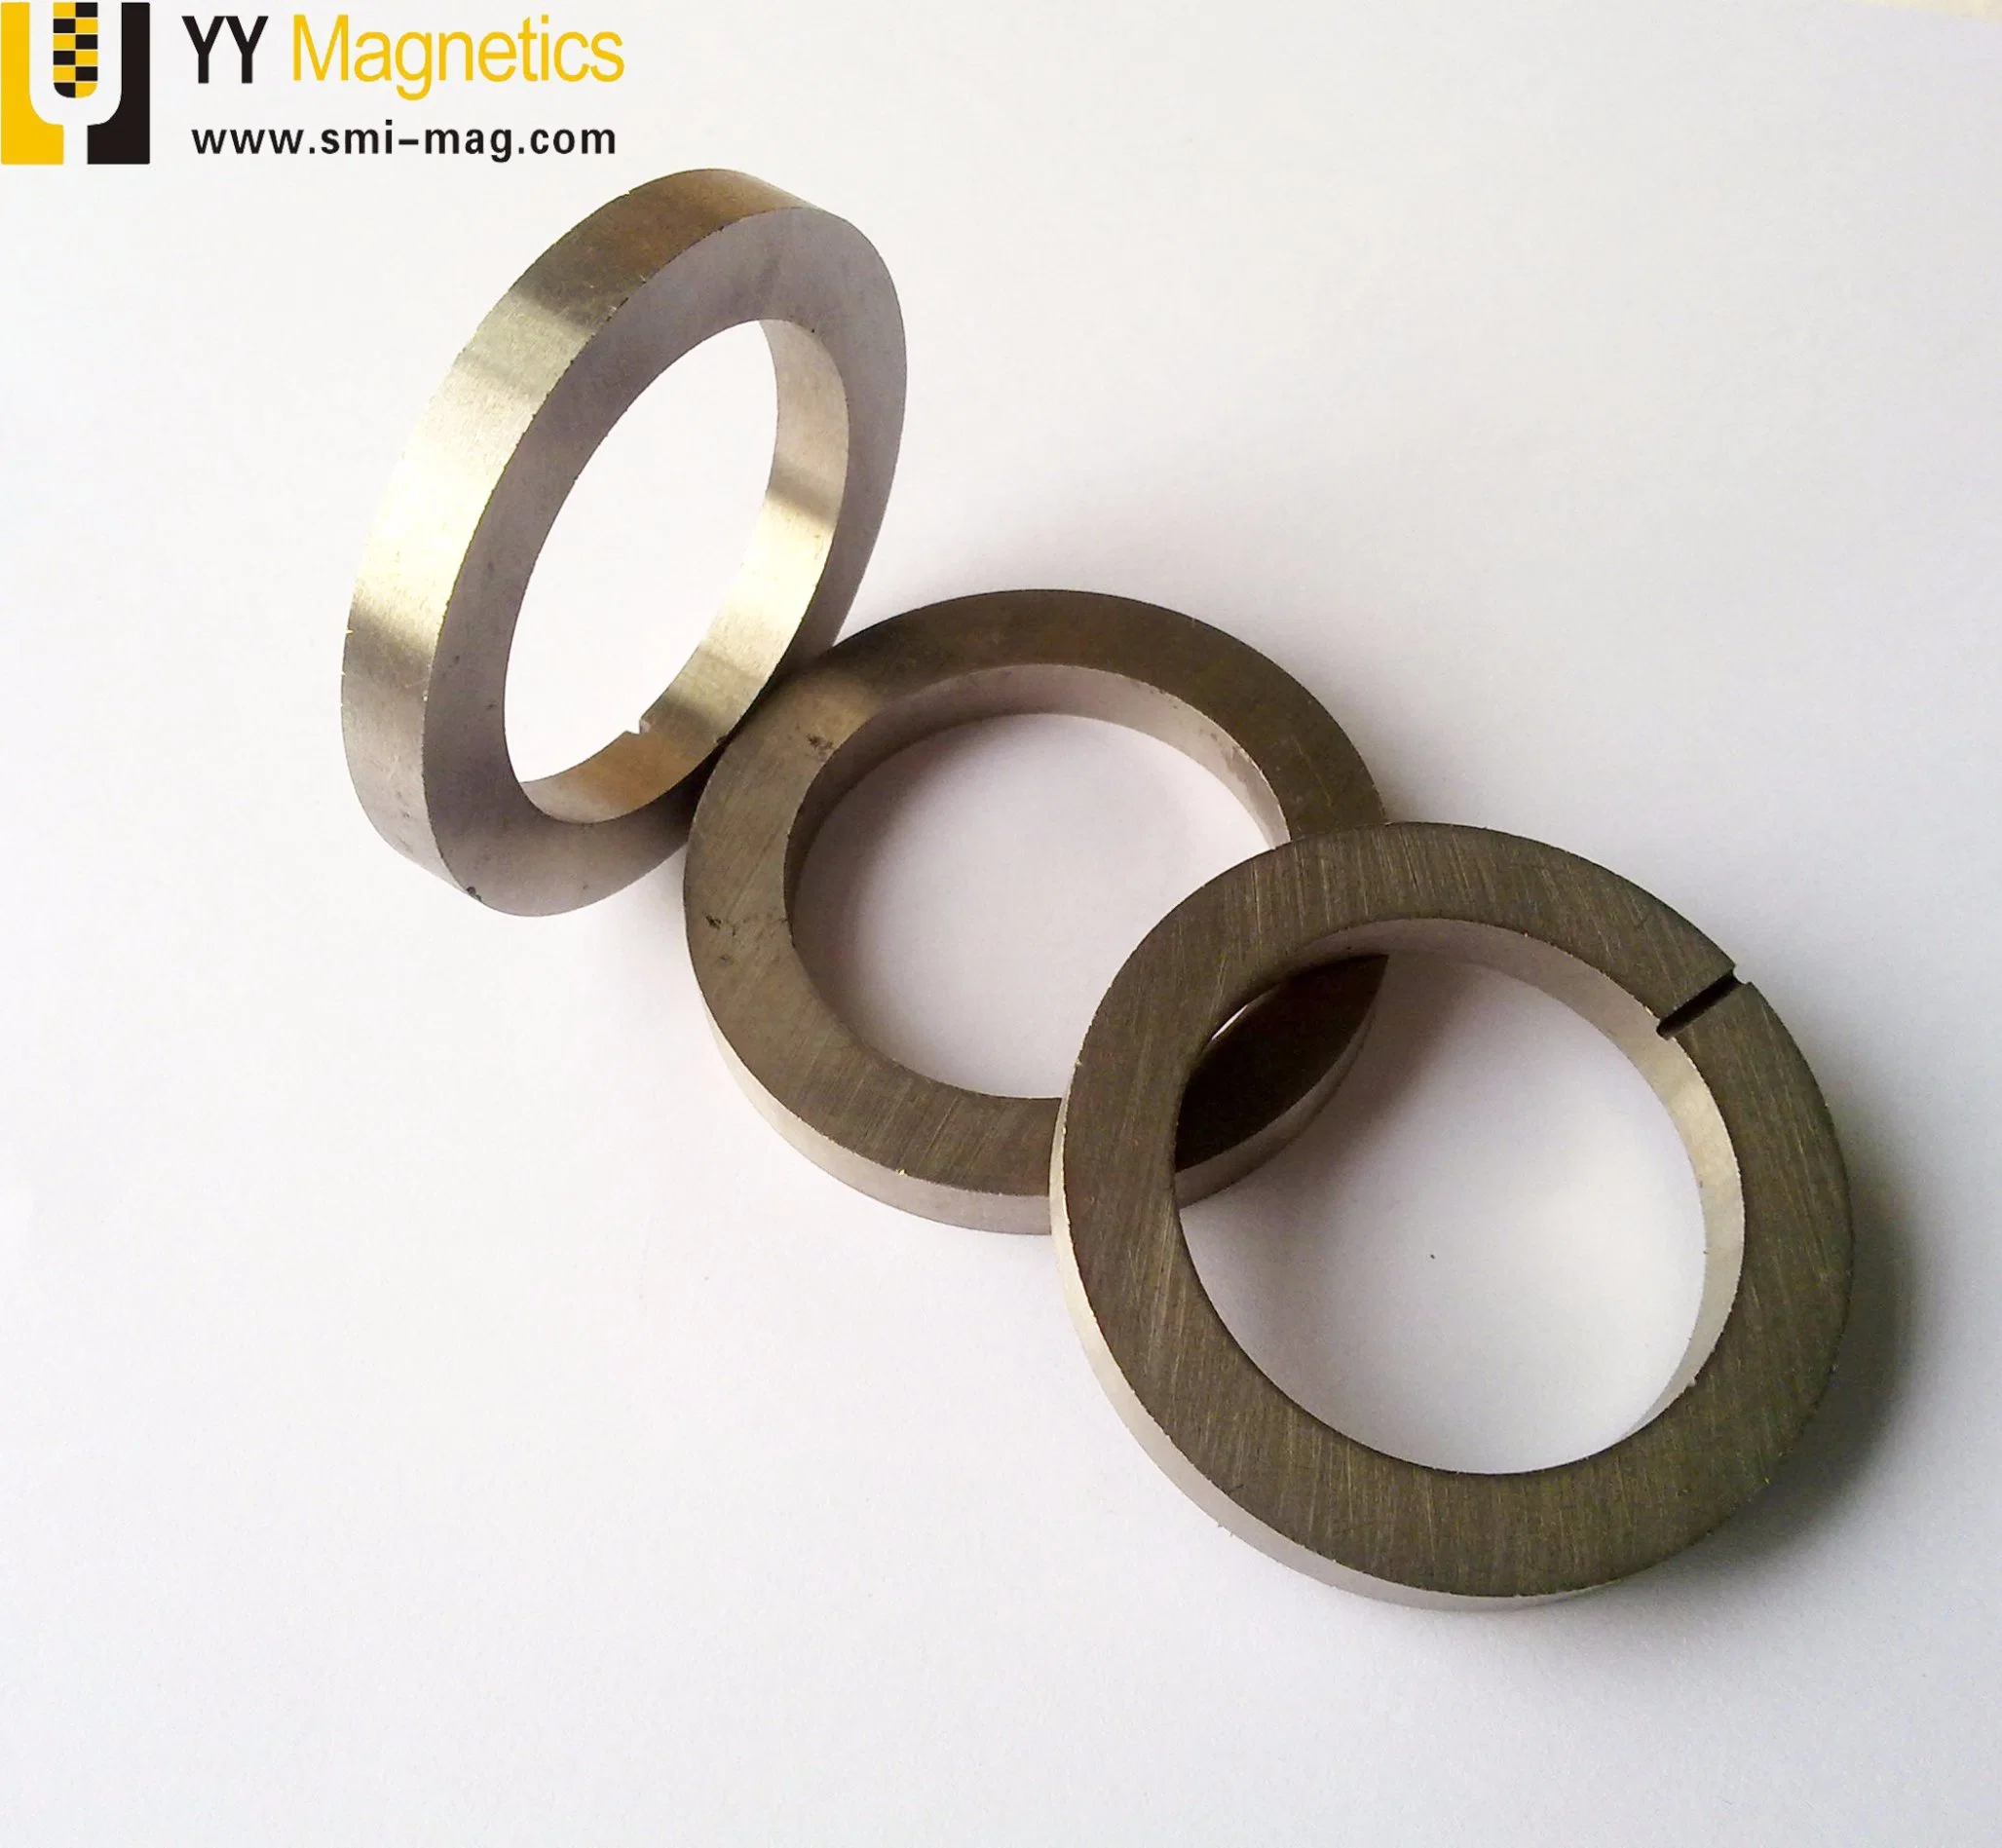 Free Sample Sintered AlNiCo Permanent Ring Magnets